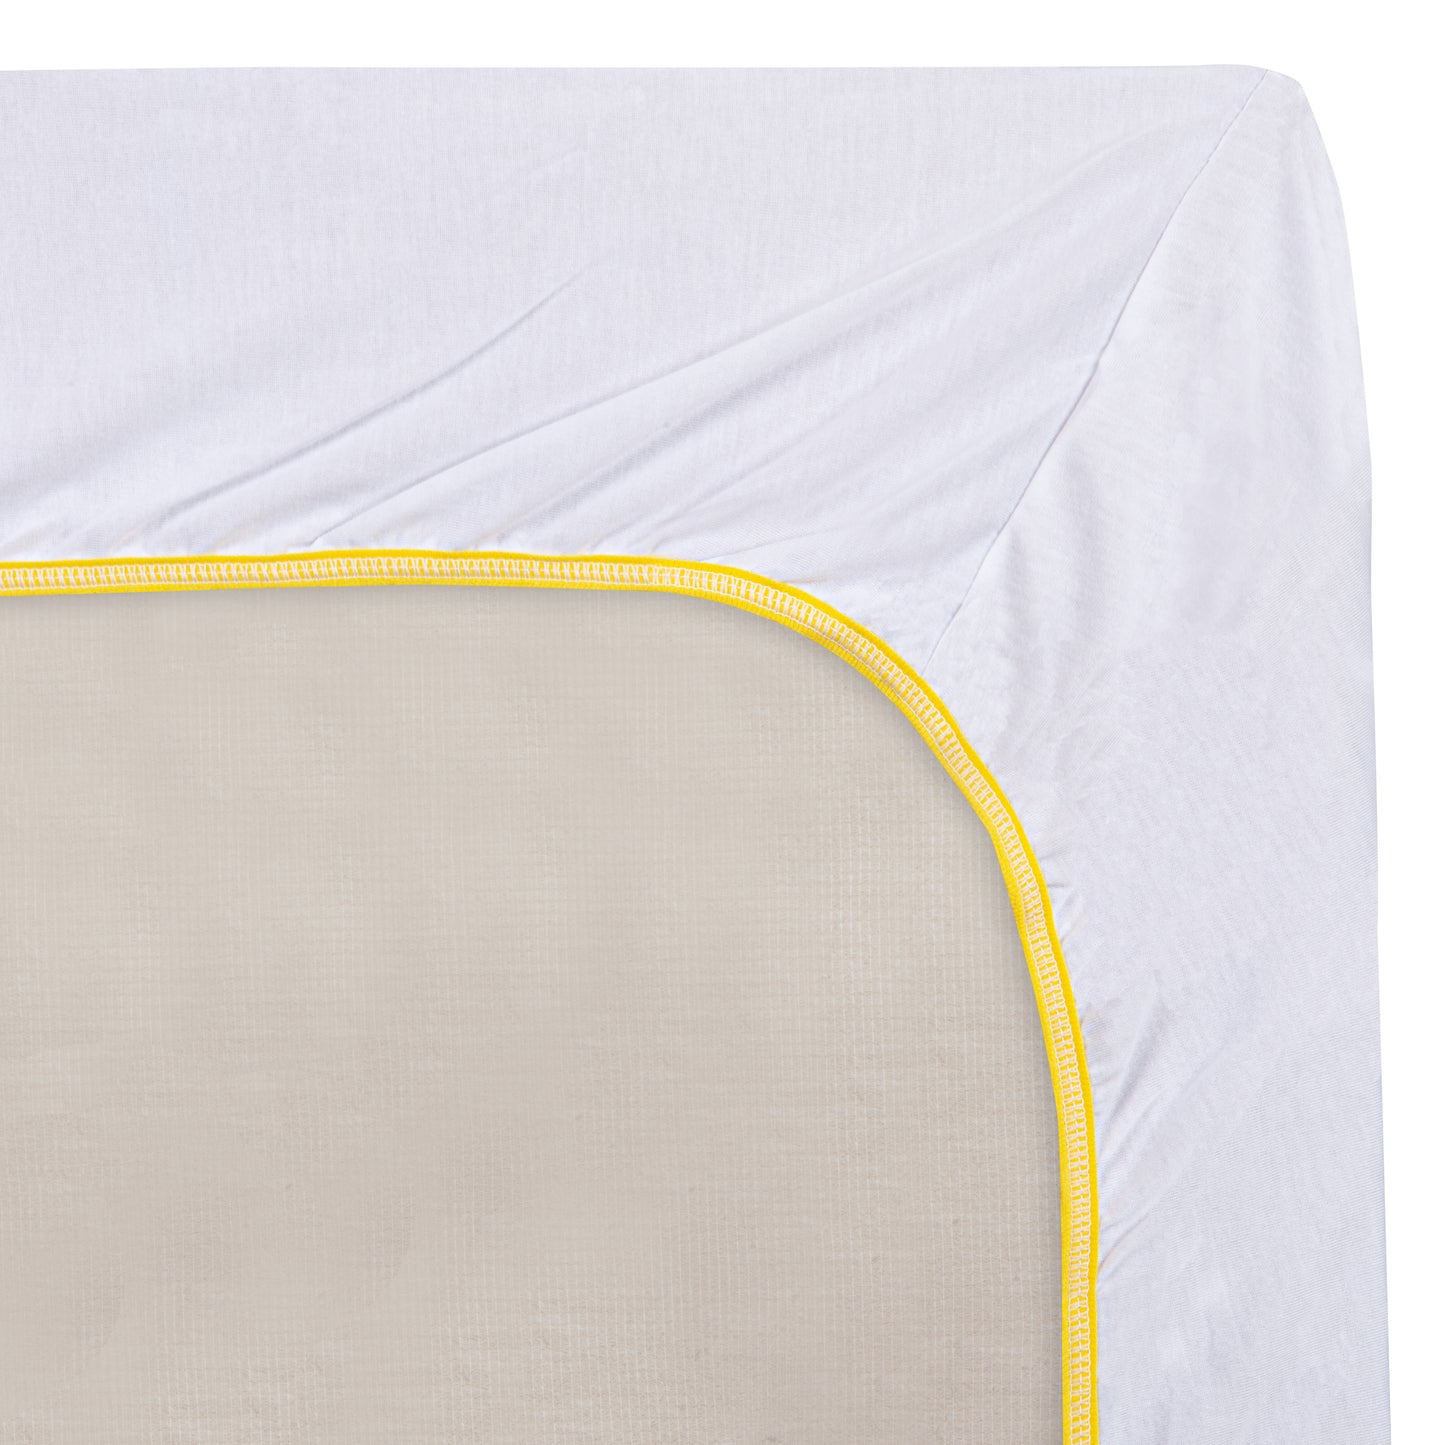 Knitted Sheet, Fitted,  60  x  84, White w/ Yellow Binding